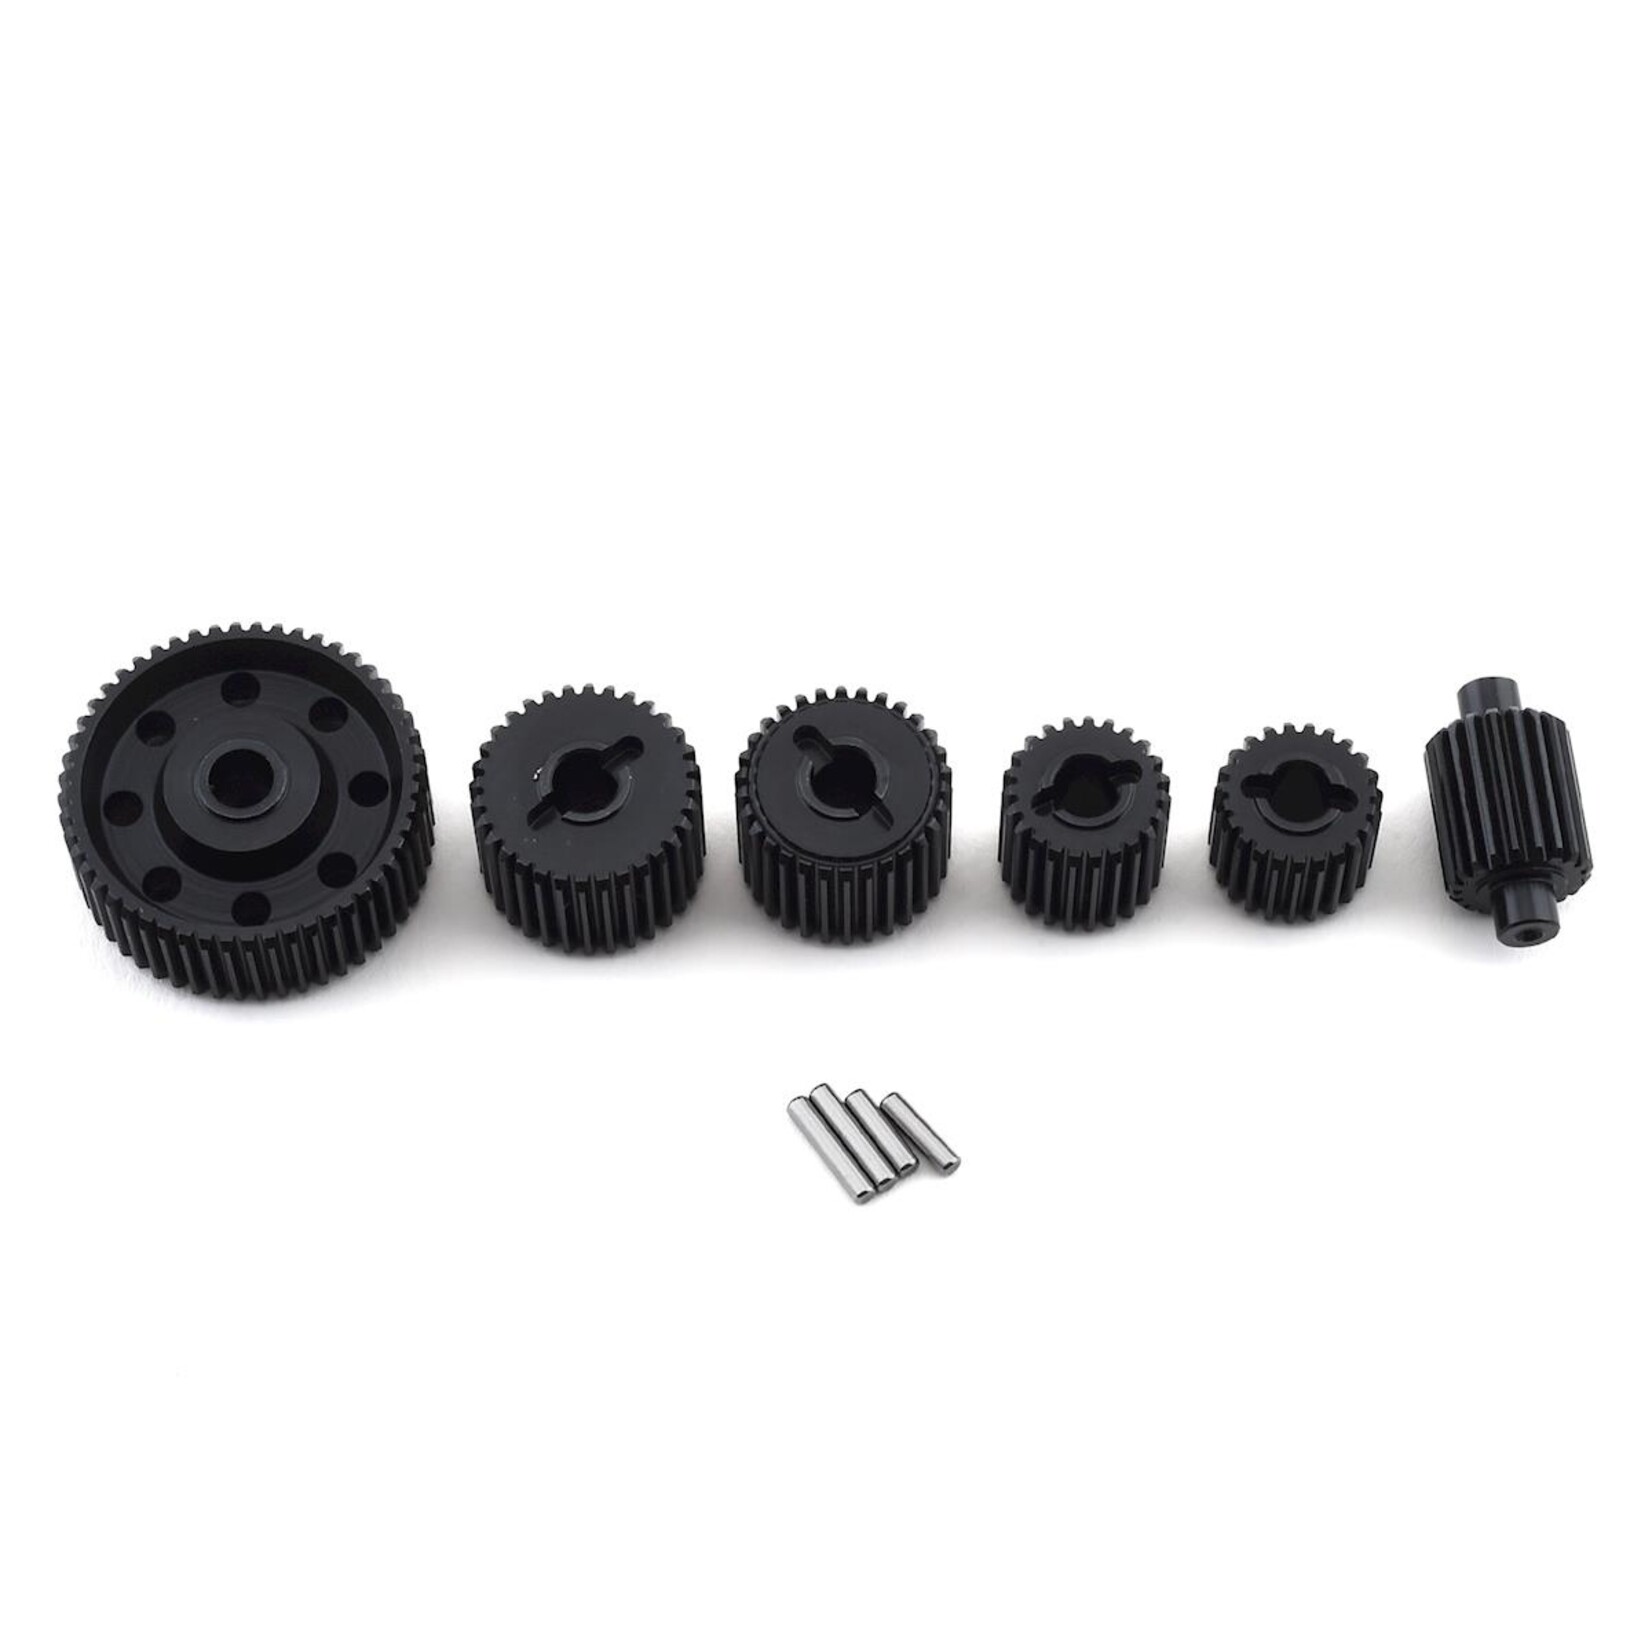 Vanquish Products Vanquish Products VFD Machined Gear Set #VPS10141